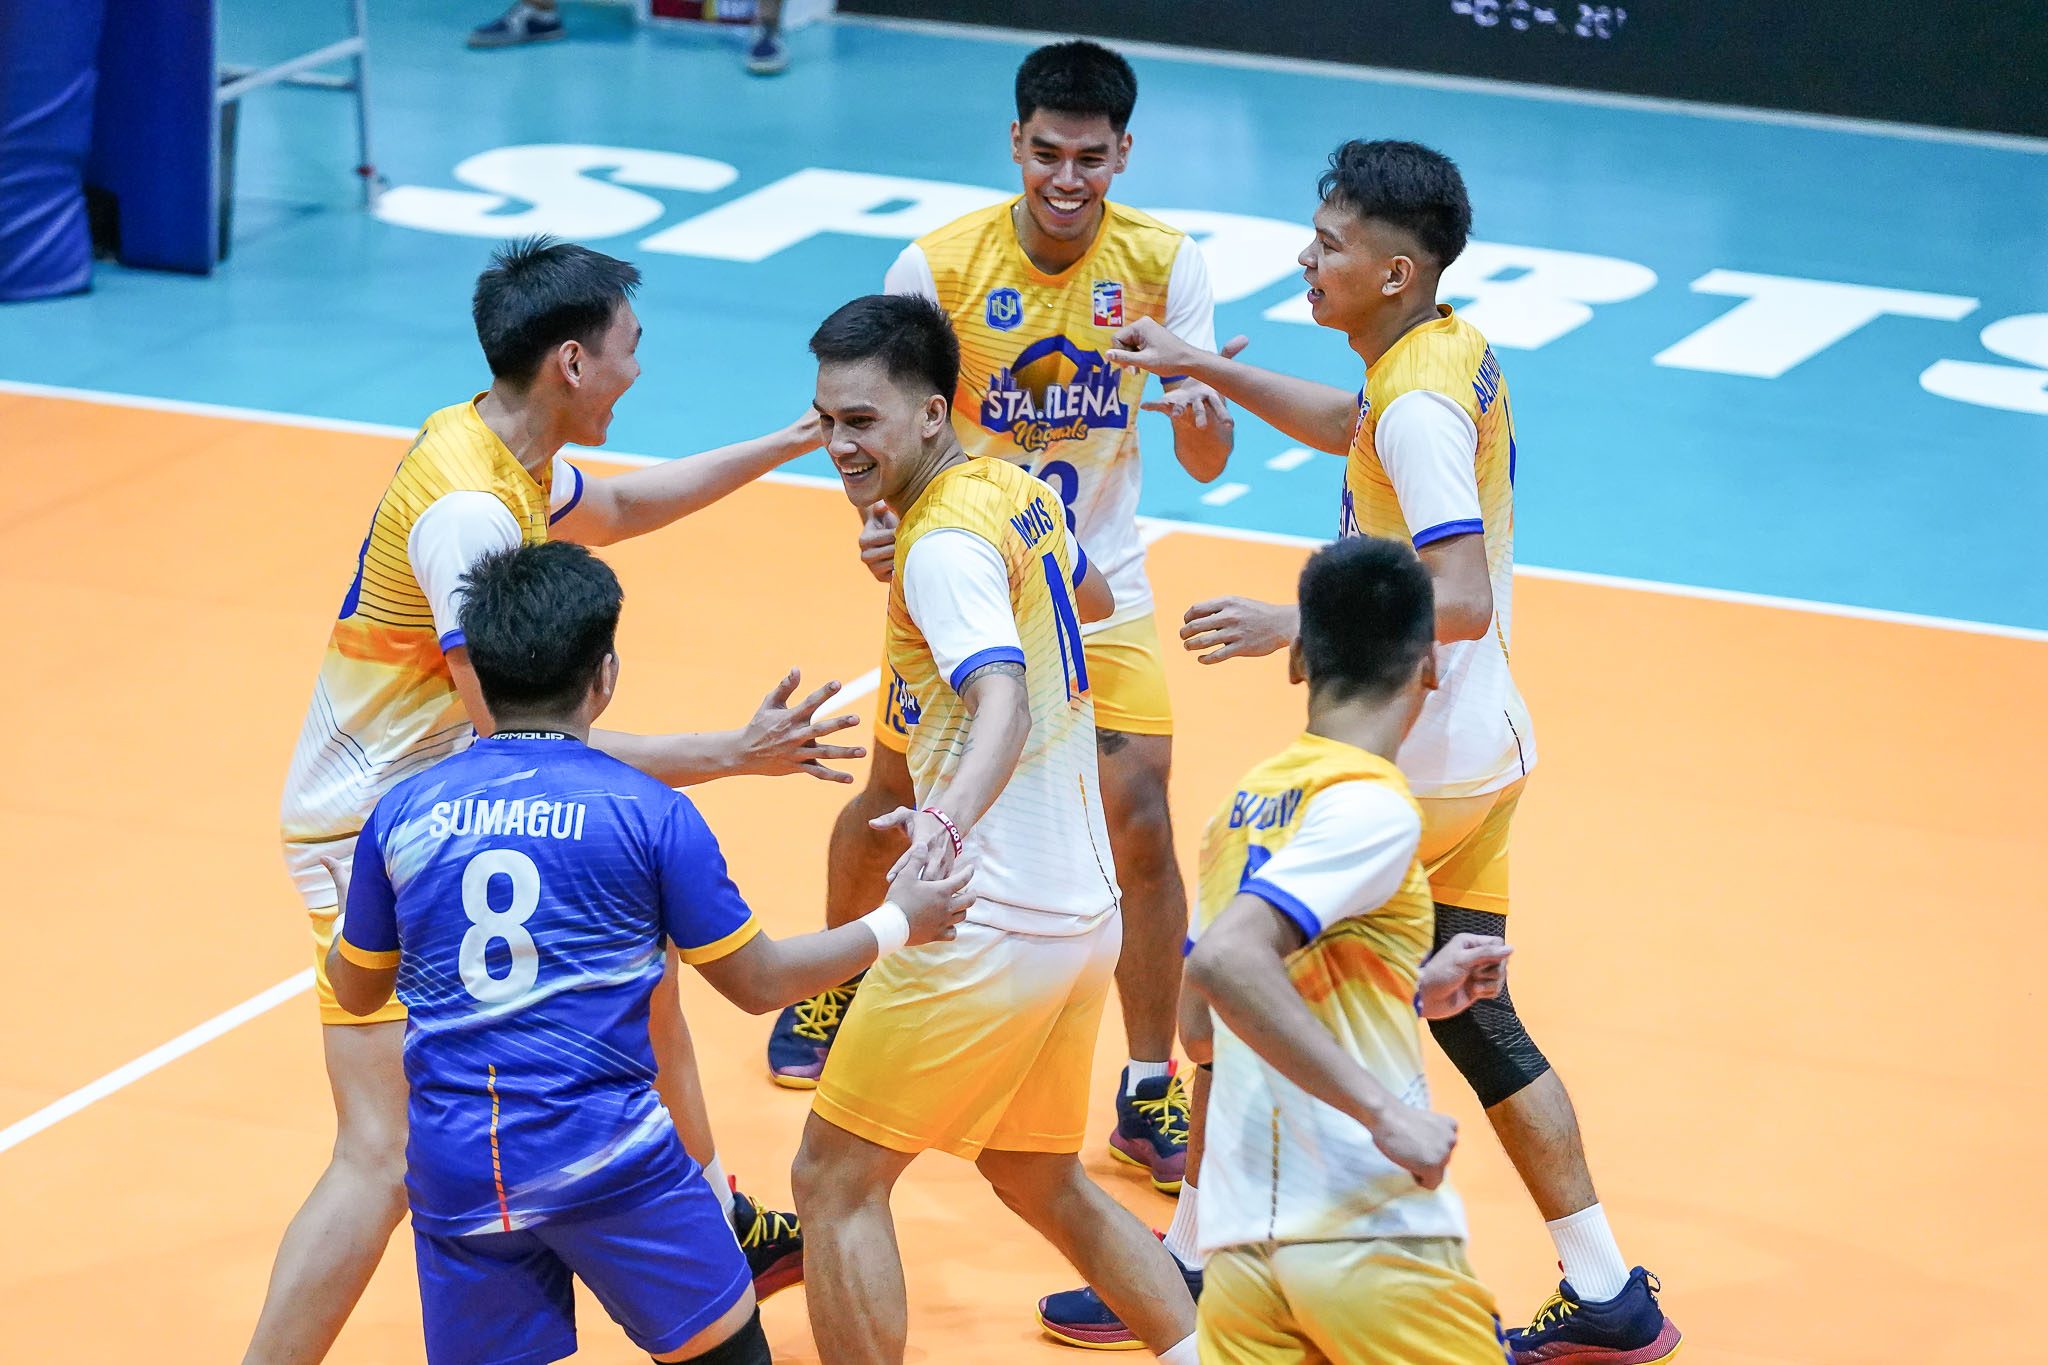 Nu Stuns Cignal From 2 Sets Down Navy Sweeps Vns To Start Spikers Turf Semis